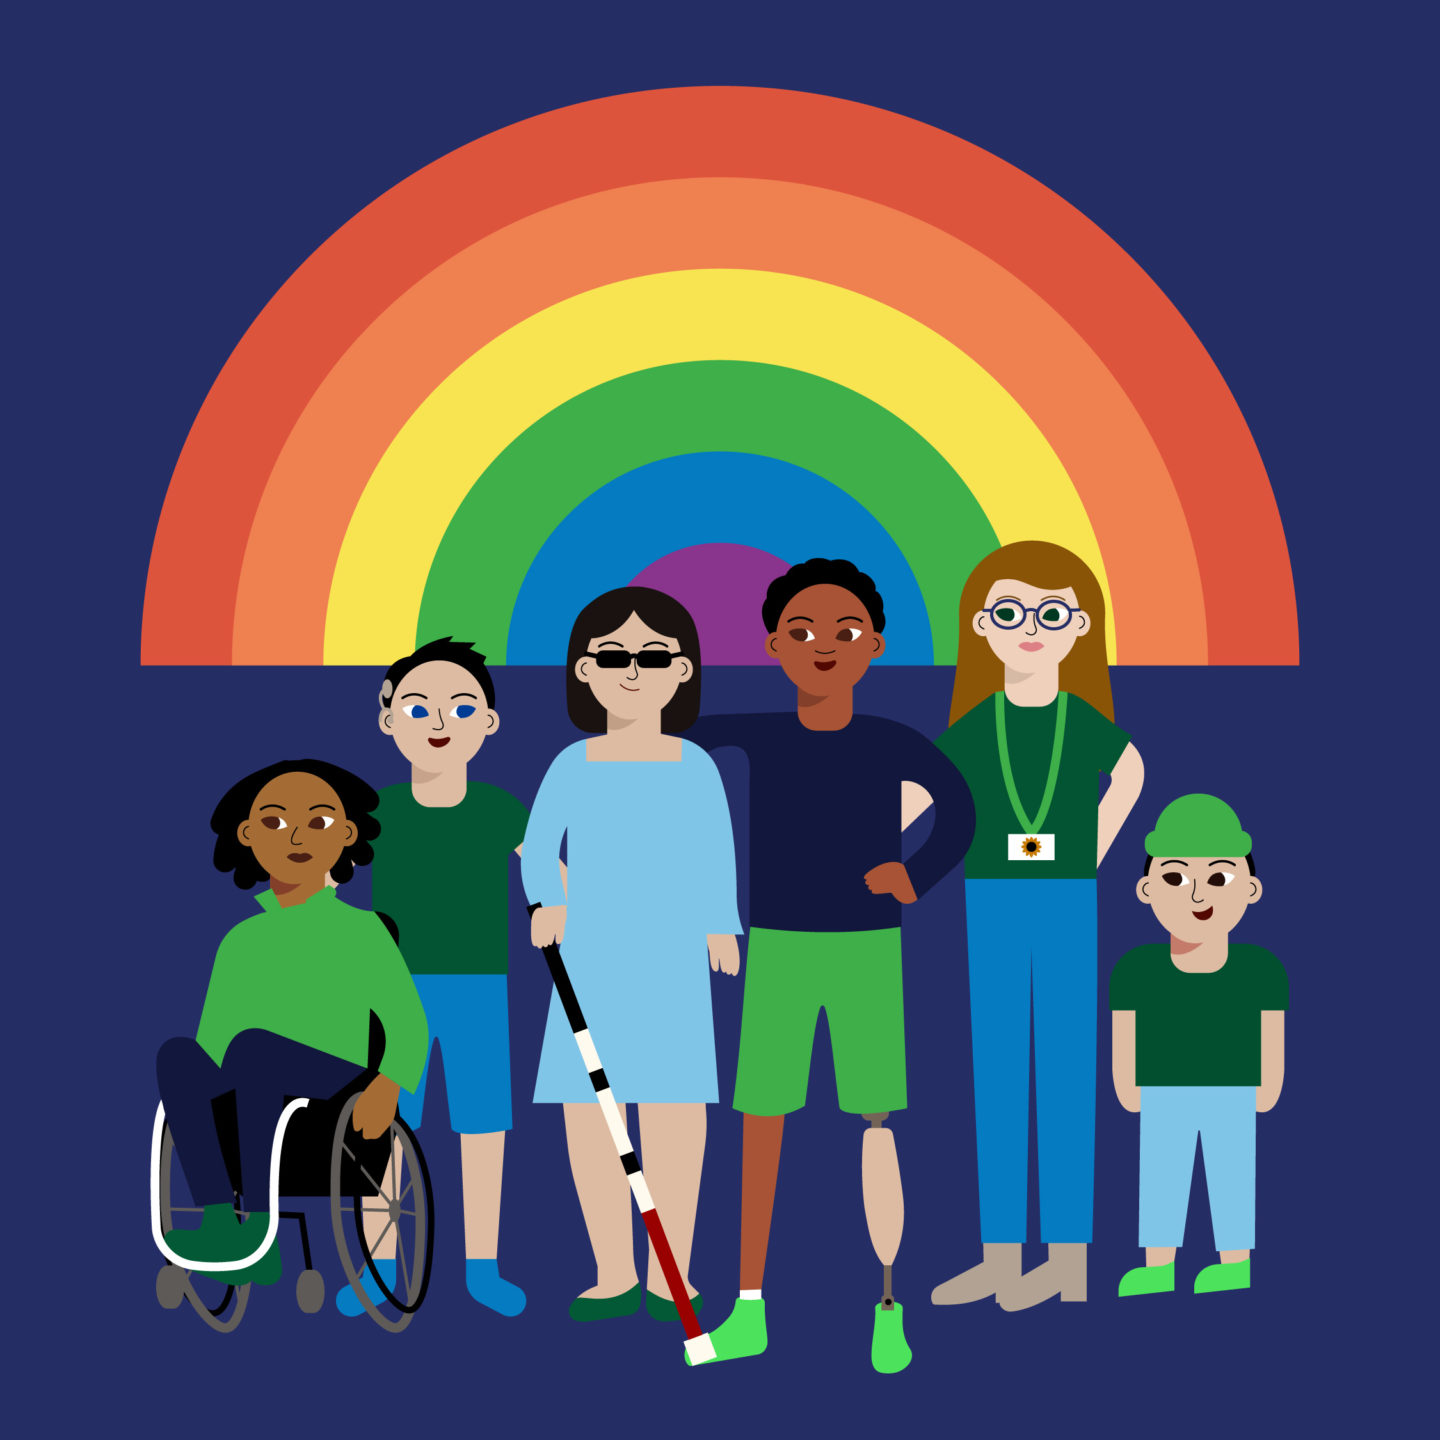 Simple illustration of diverse people with disabilities with rainbow LGBTQIA+ rainbow above them.